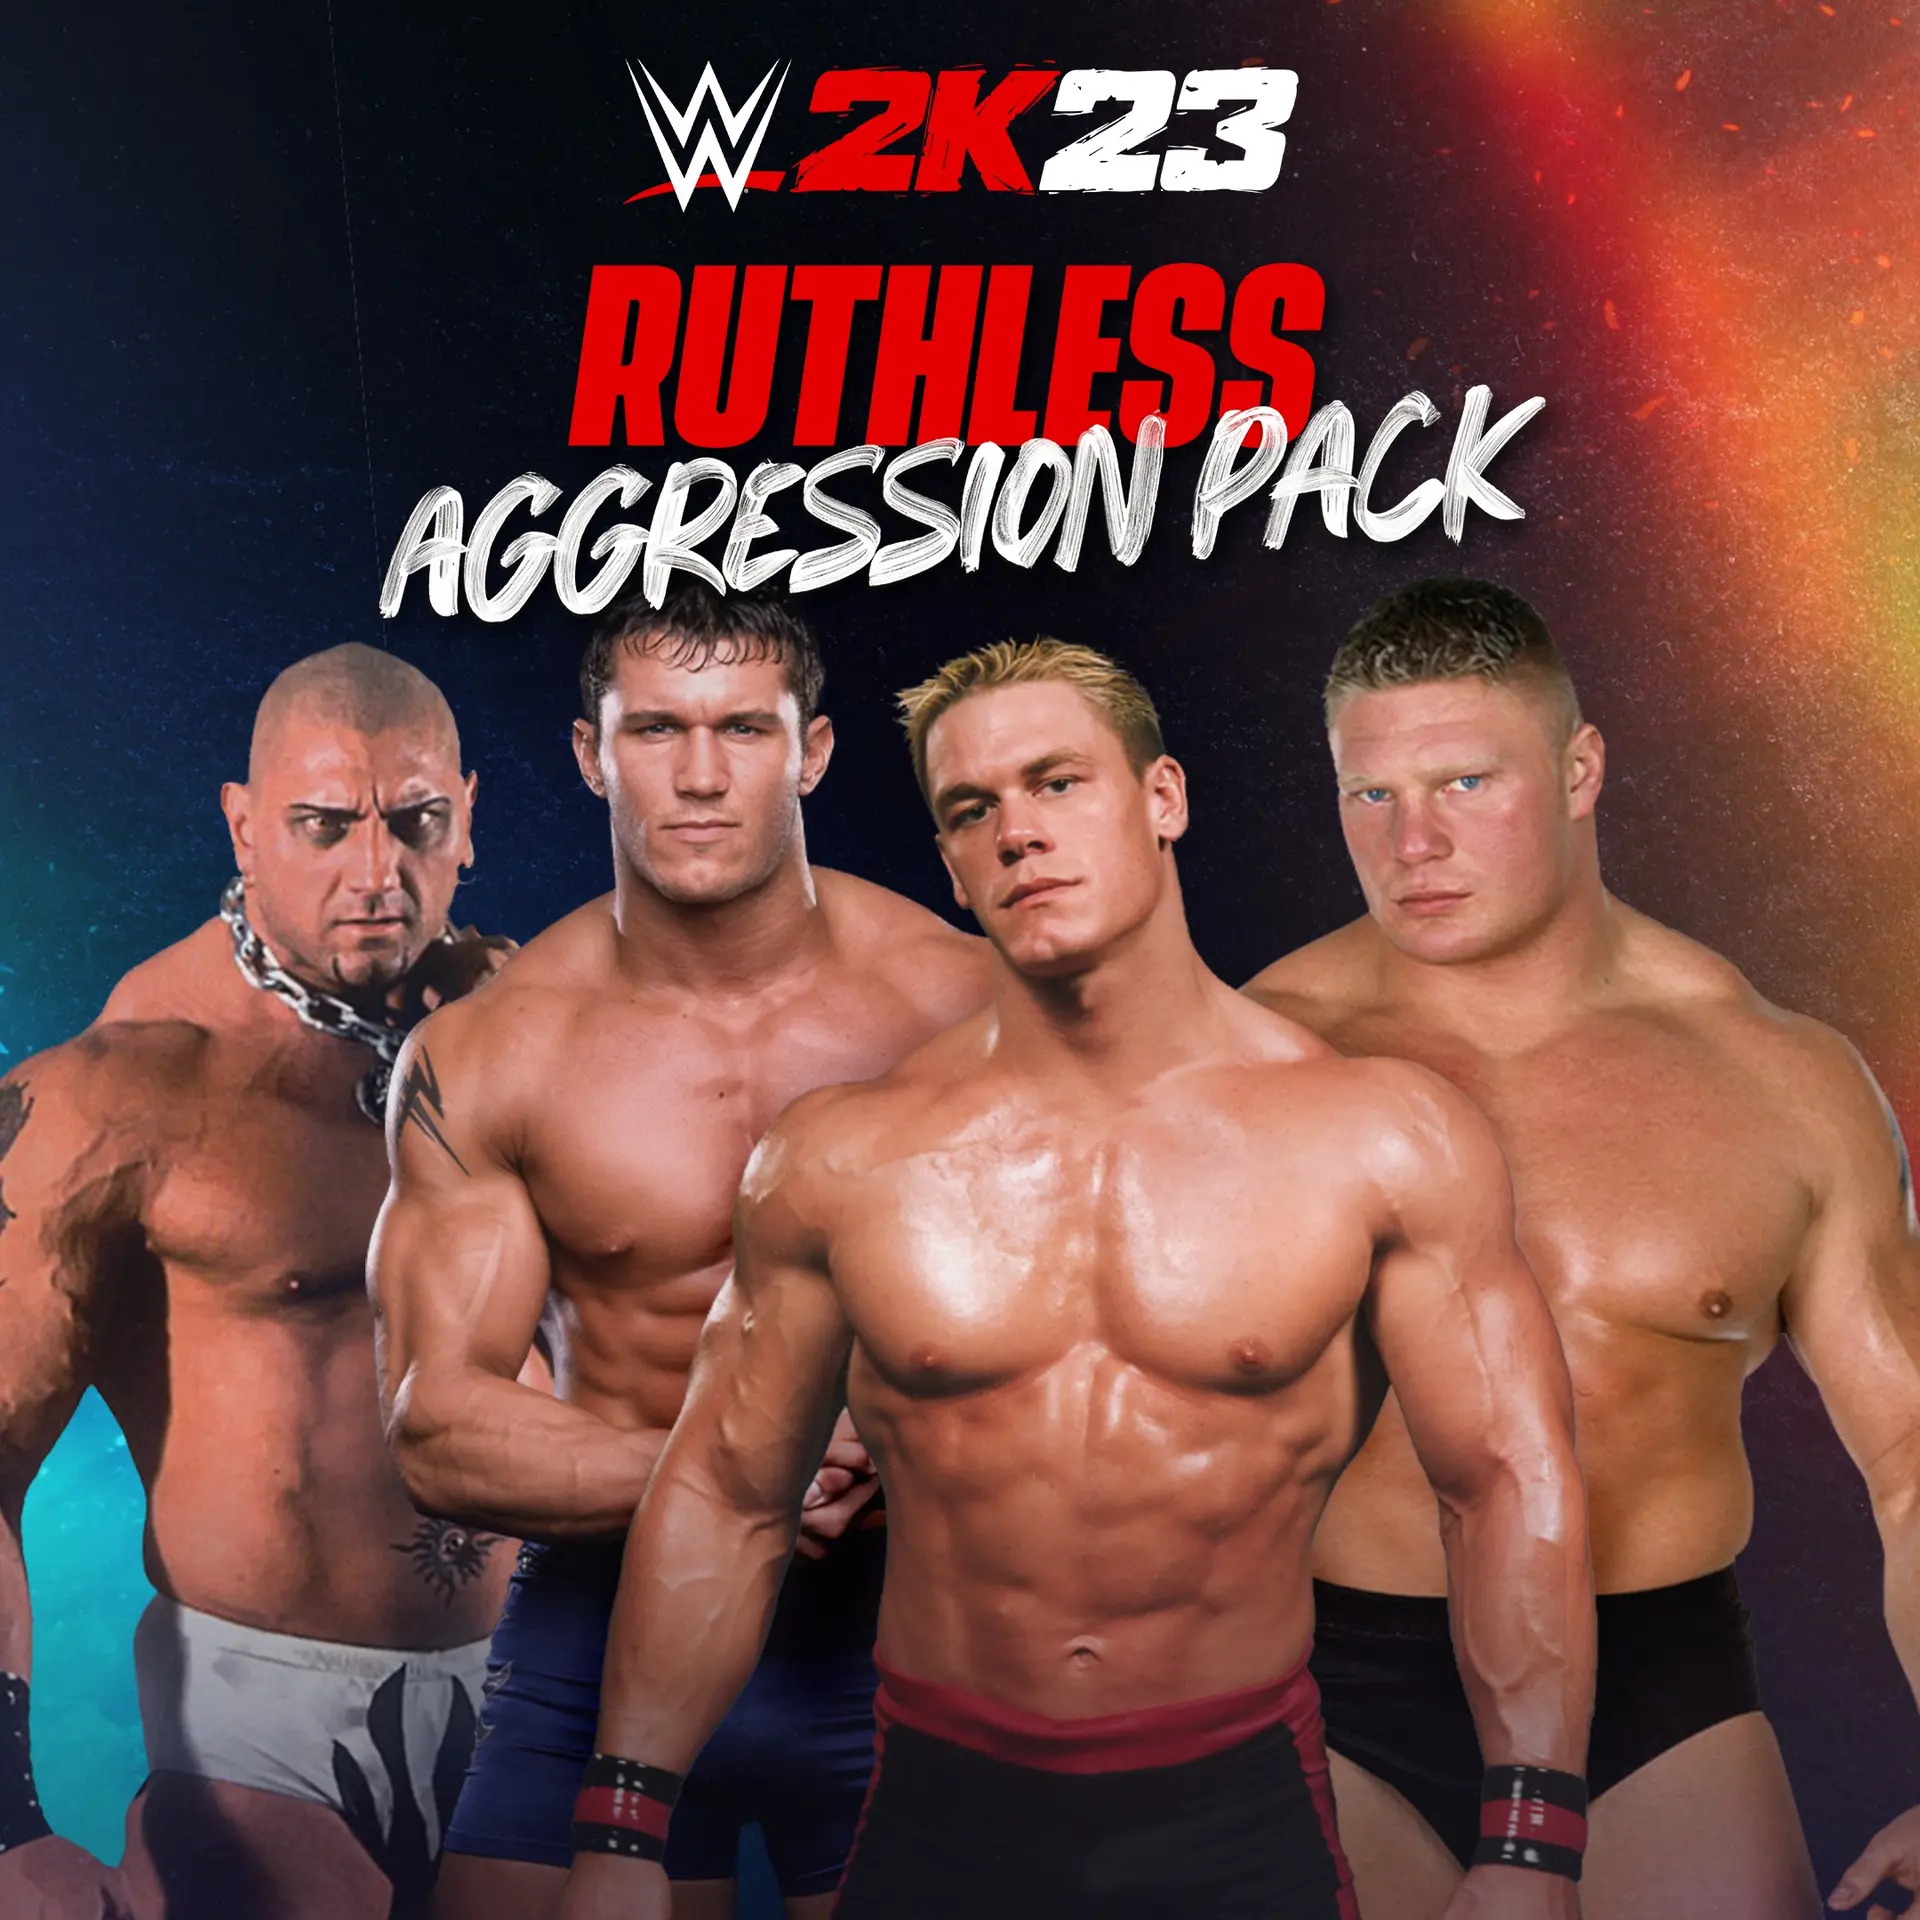 WWE 2K23 Ruthless Aggression Pack for Xbox Series X|S (Xbox Games US)